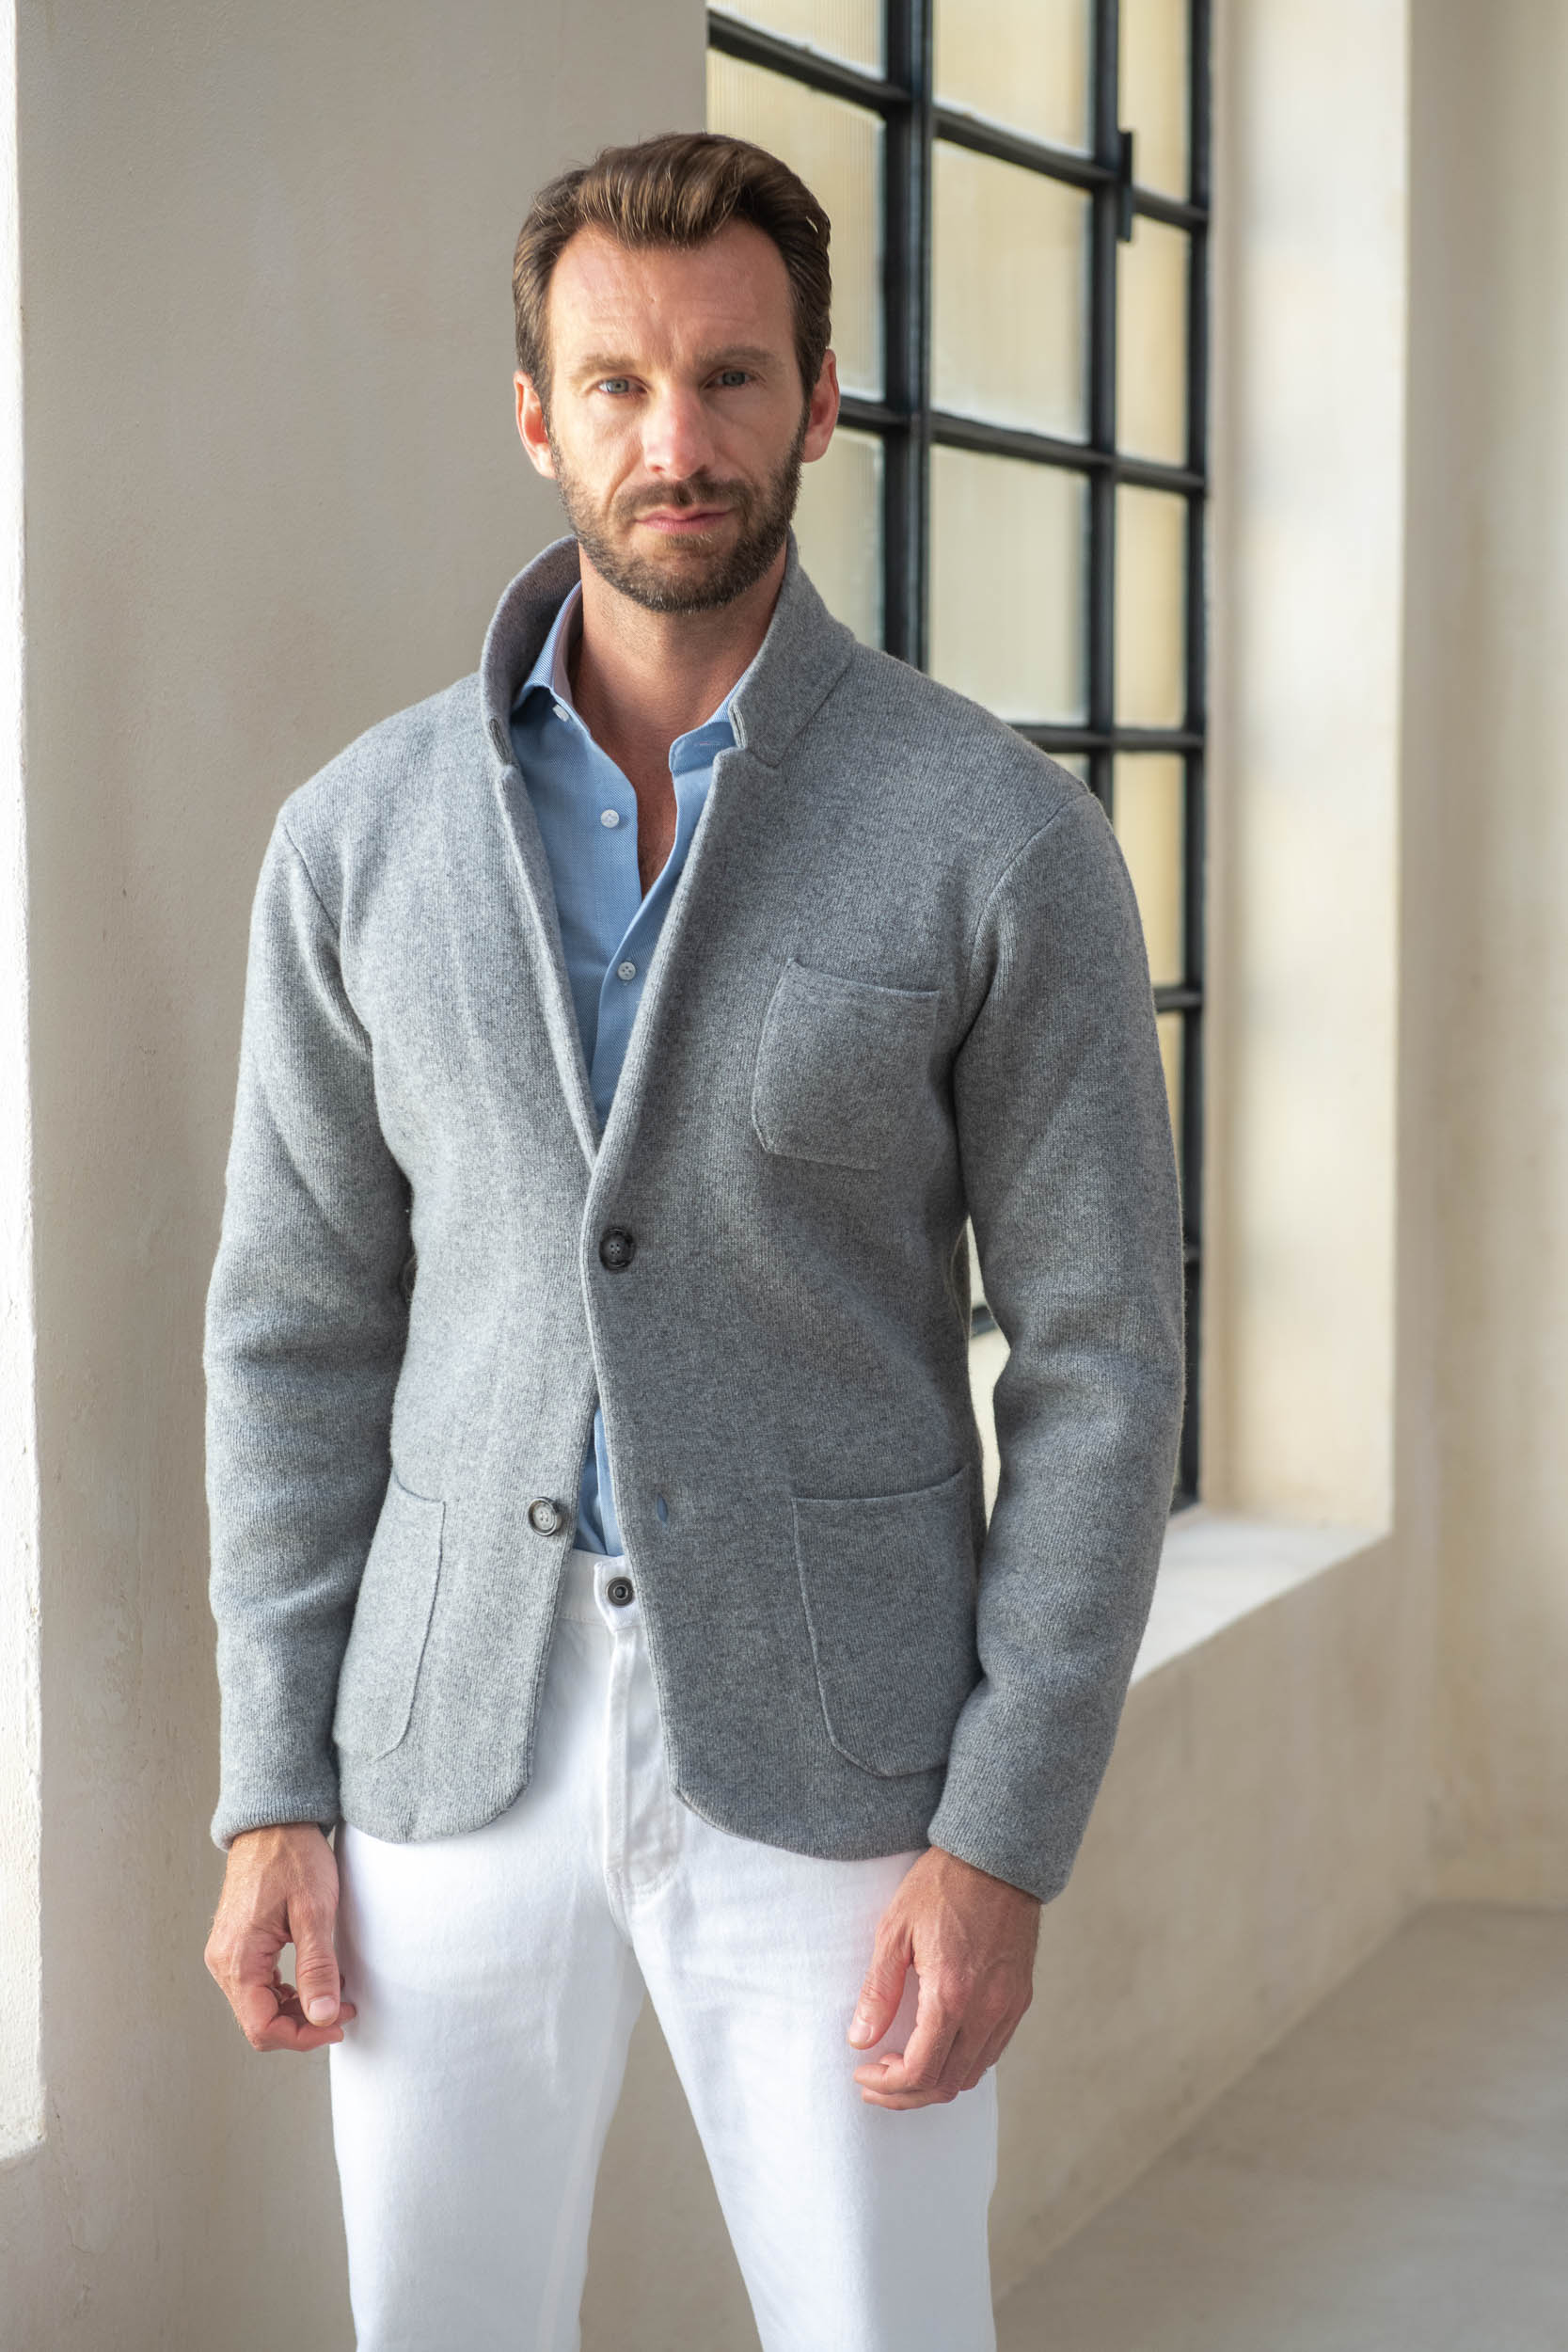 GREY KNITTED JACKET – WOOL AND CASHMERE, Made in Italy